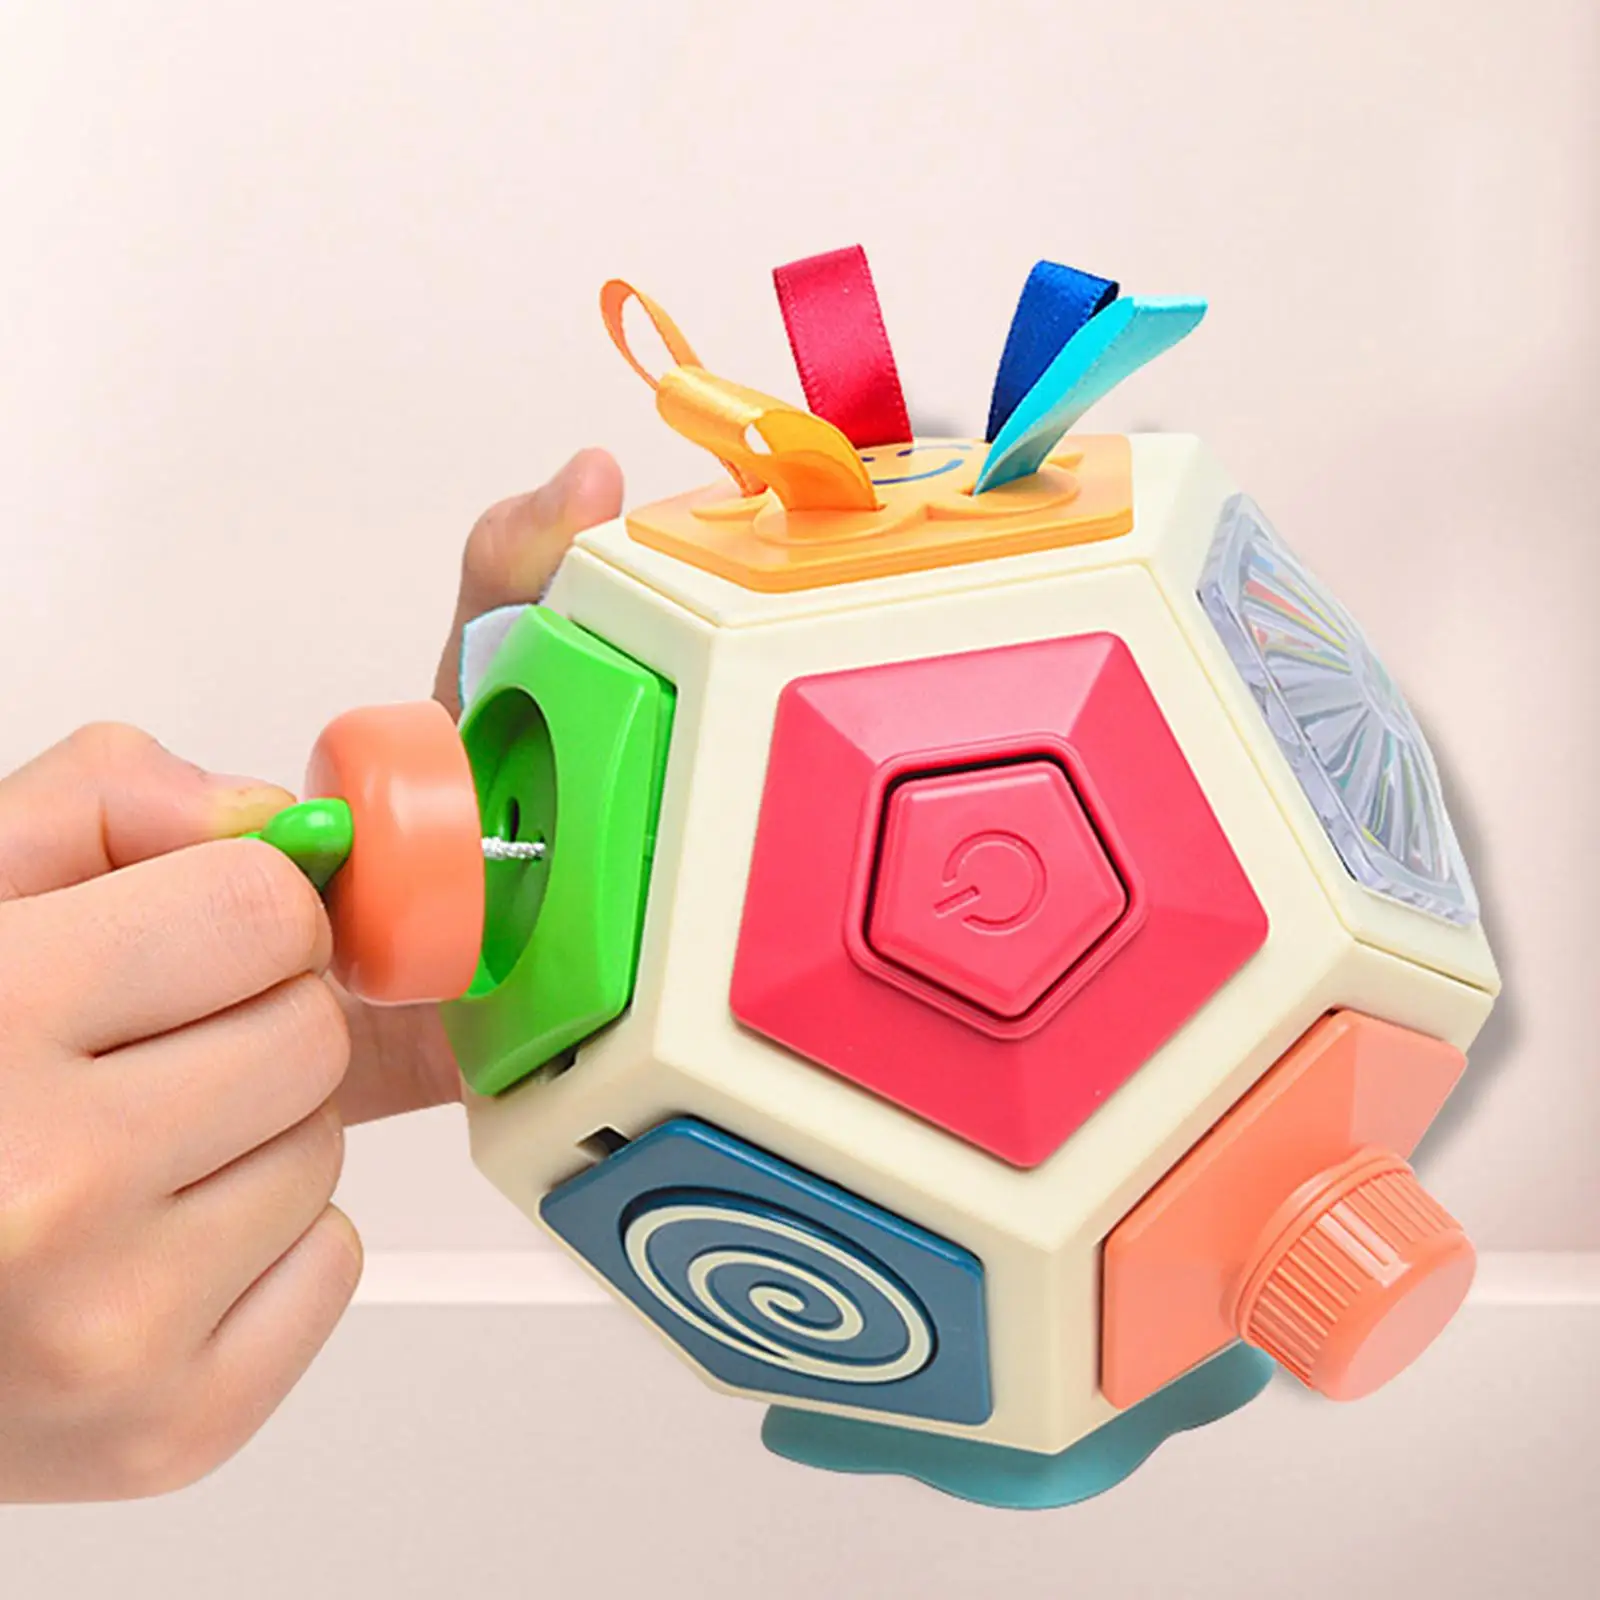 Sensory Busy Ball Educational Fine Motor Skills Color Recognition Busy Hand Grasping Ball for Newborn Airplane Toys Kids